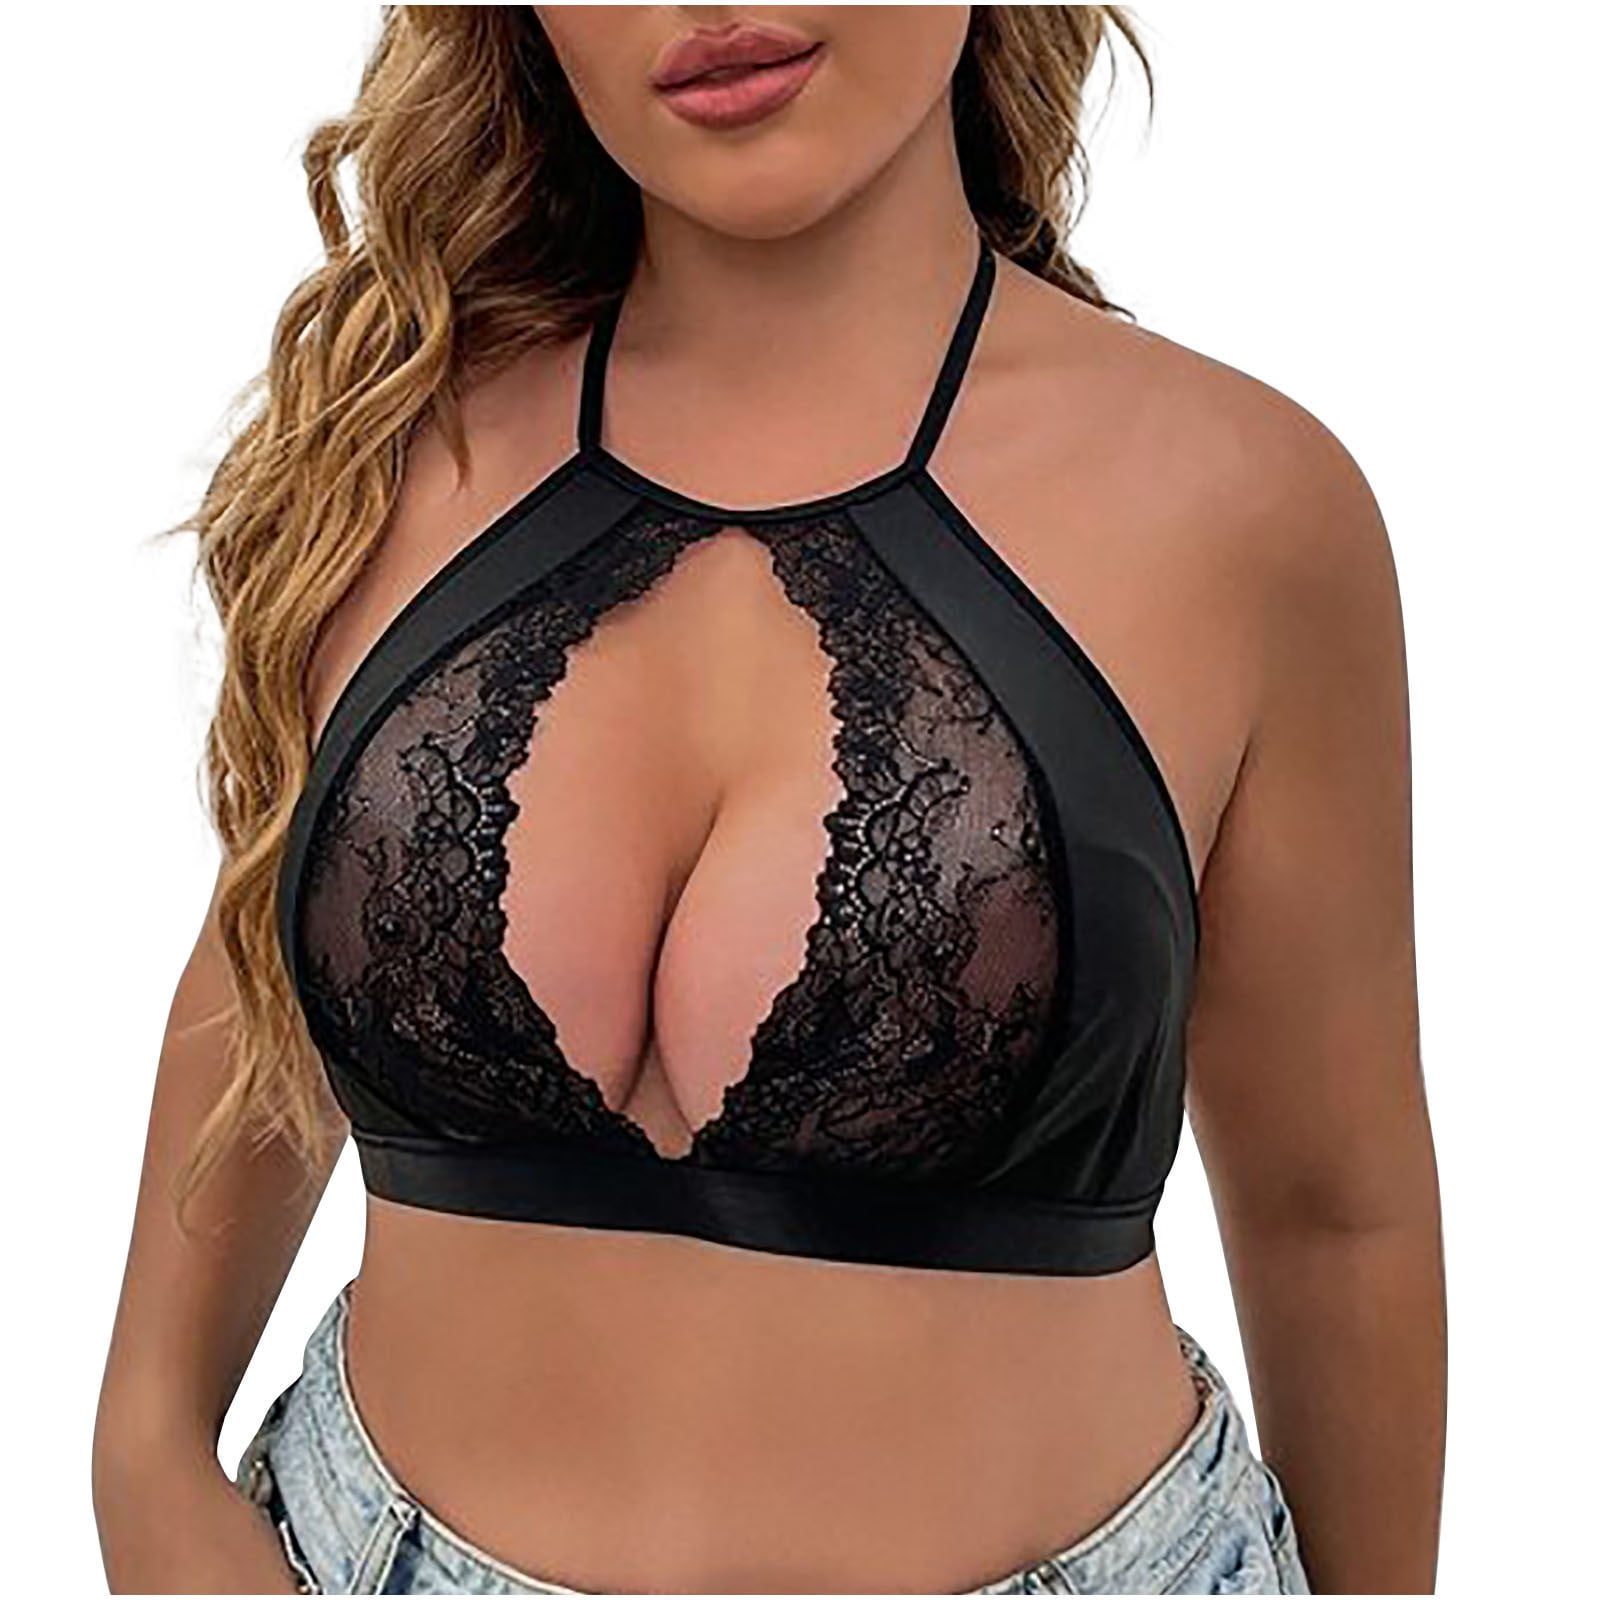 Women's Lace Plunge Plus Size Bras Halter Open Back See Through Lingerie  Underwear Nightclothes Cutout Sexy Top